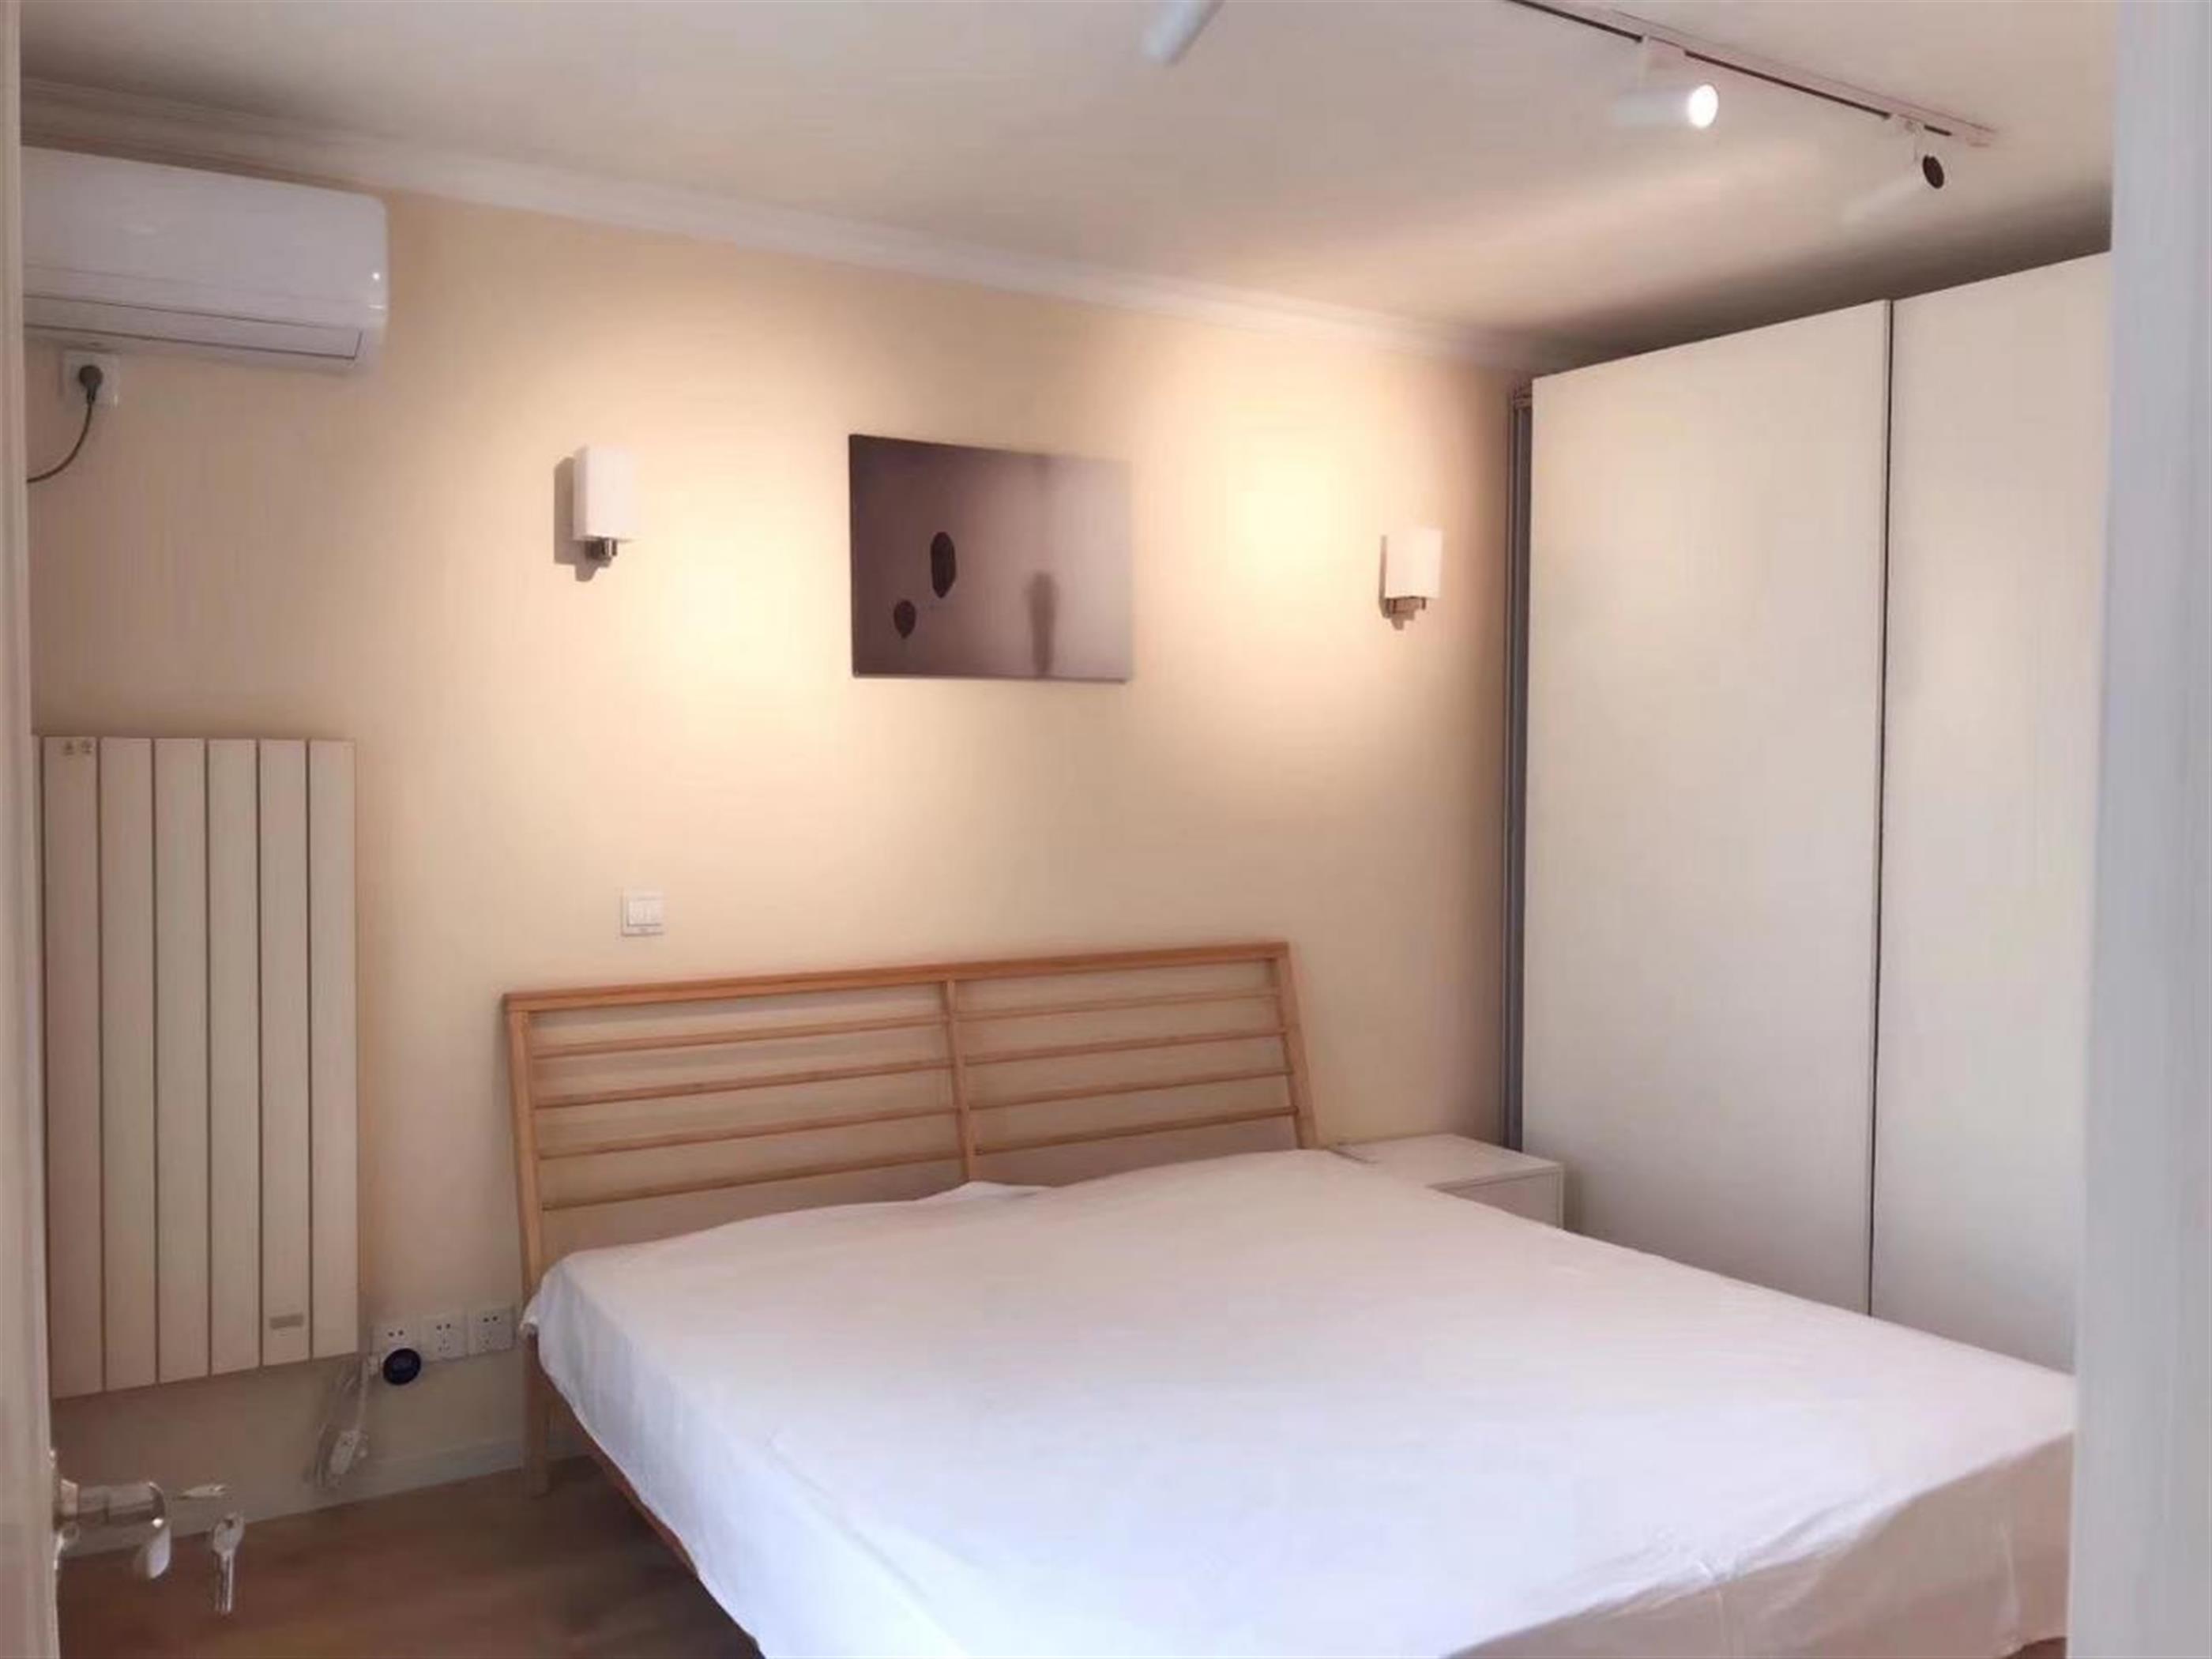 closet space in the bedroom Bright Spacious 1BR FFC Apt nr LN 9/12 & Jiashan Mkt for Rent in Shanghai